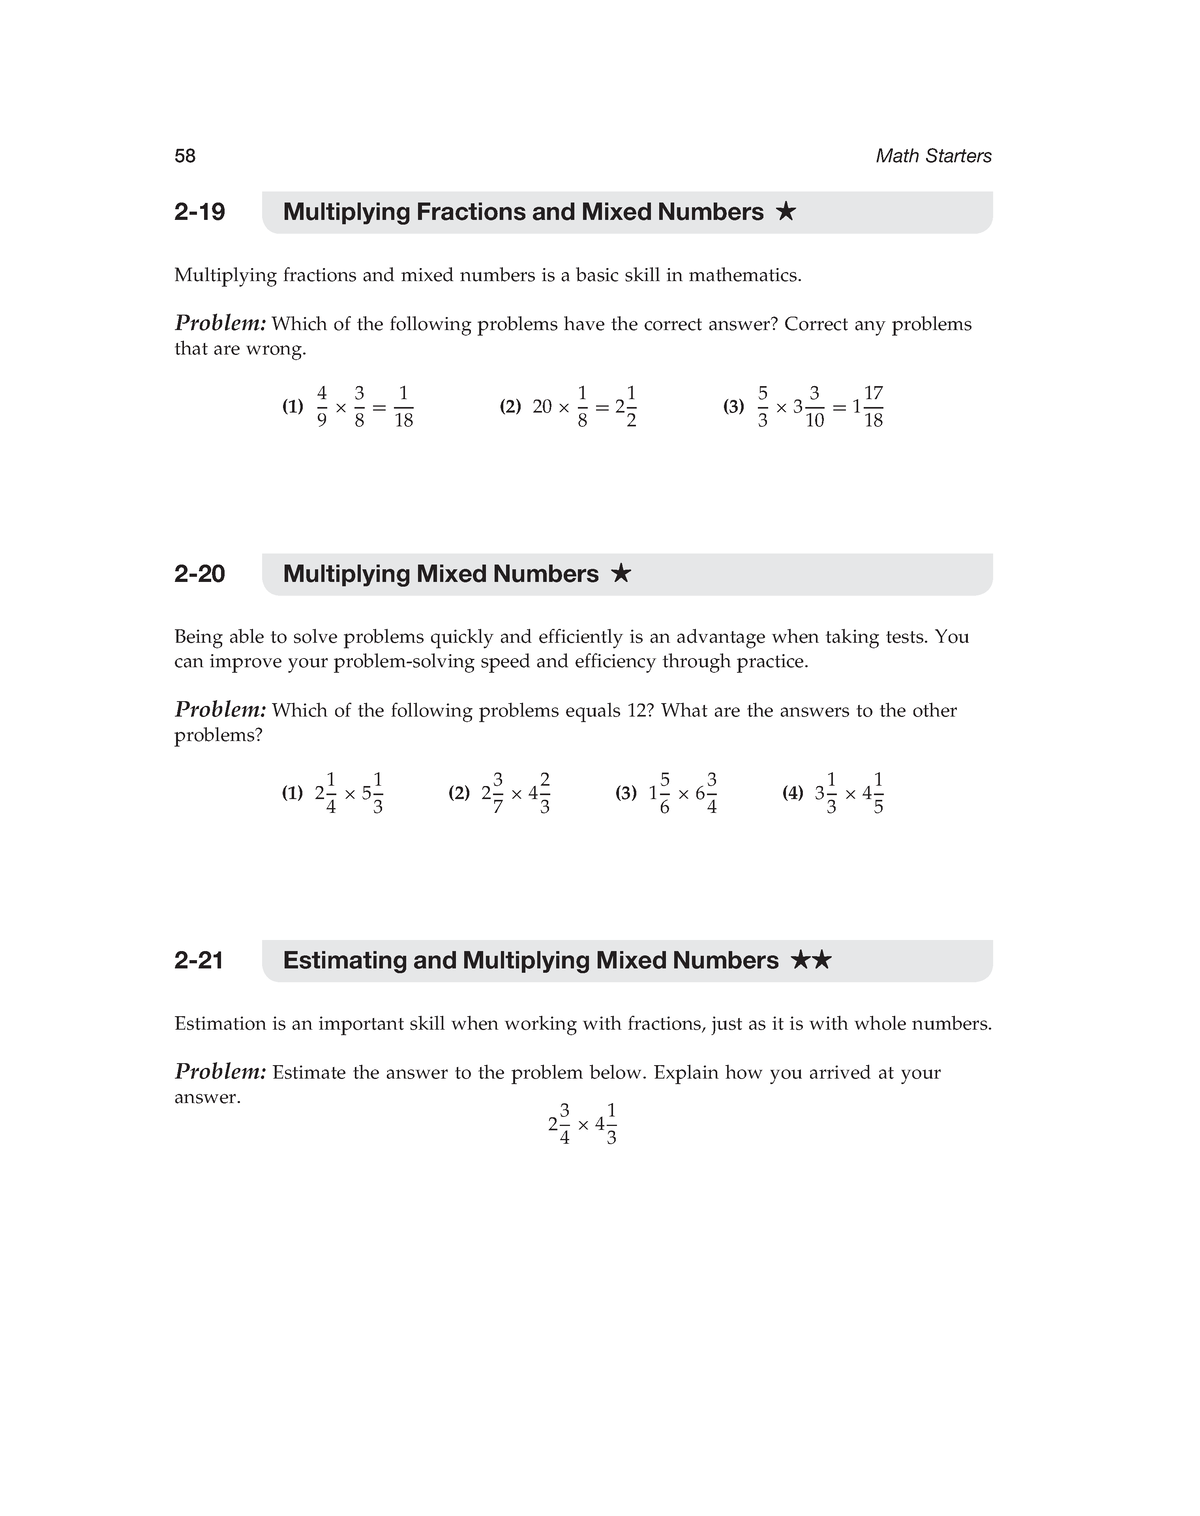 math-starters-5-to-10-minute-activities-aligned-with-the-common-core